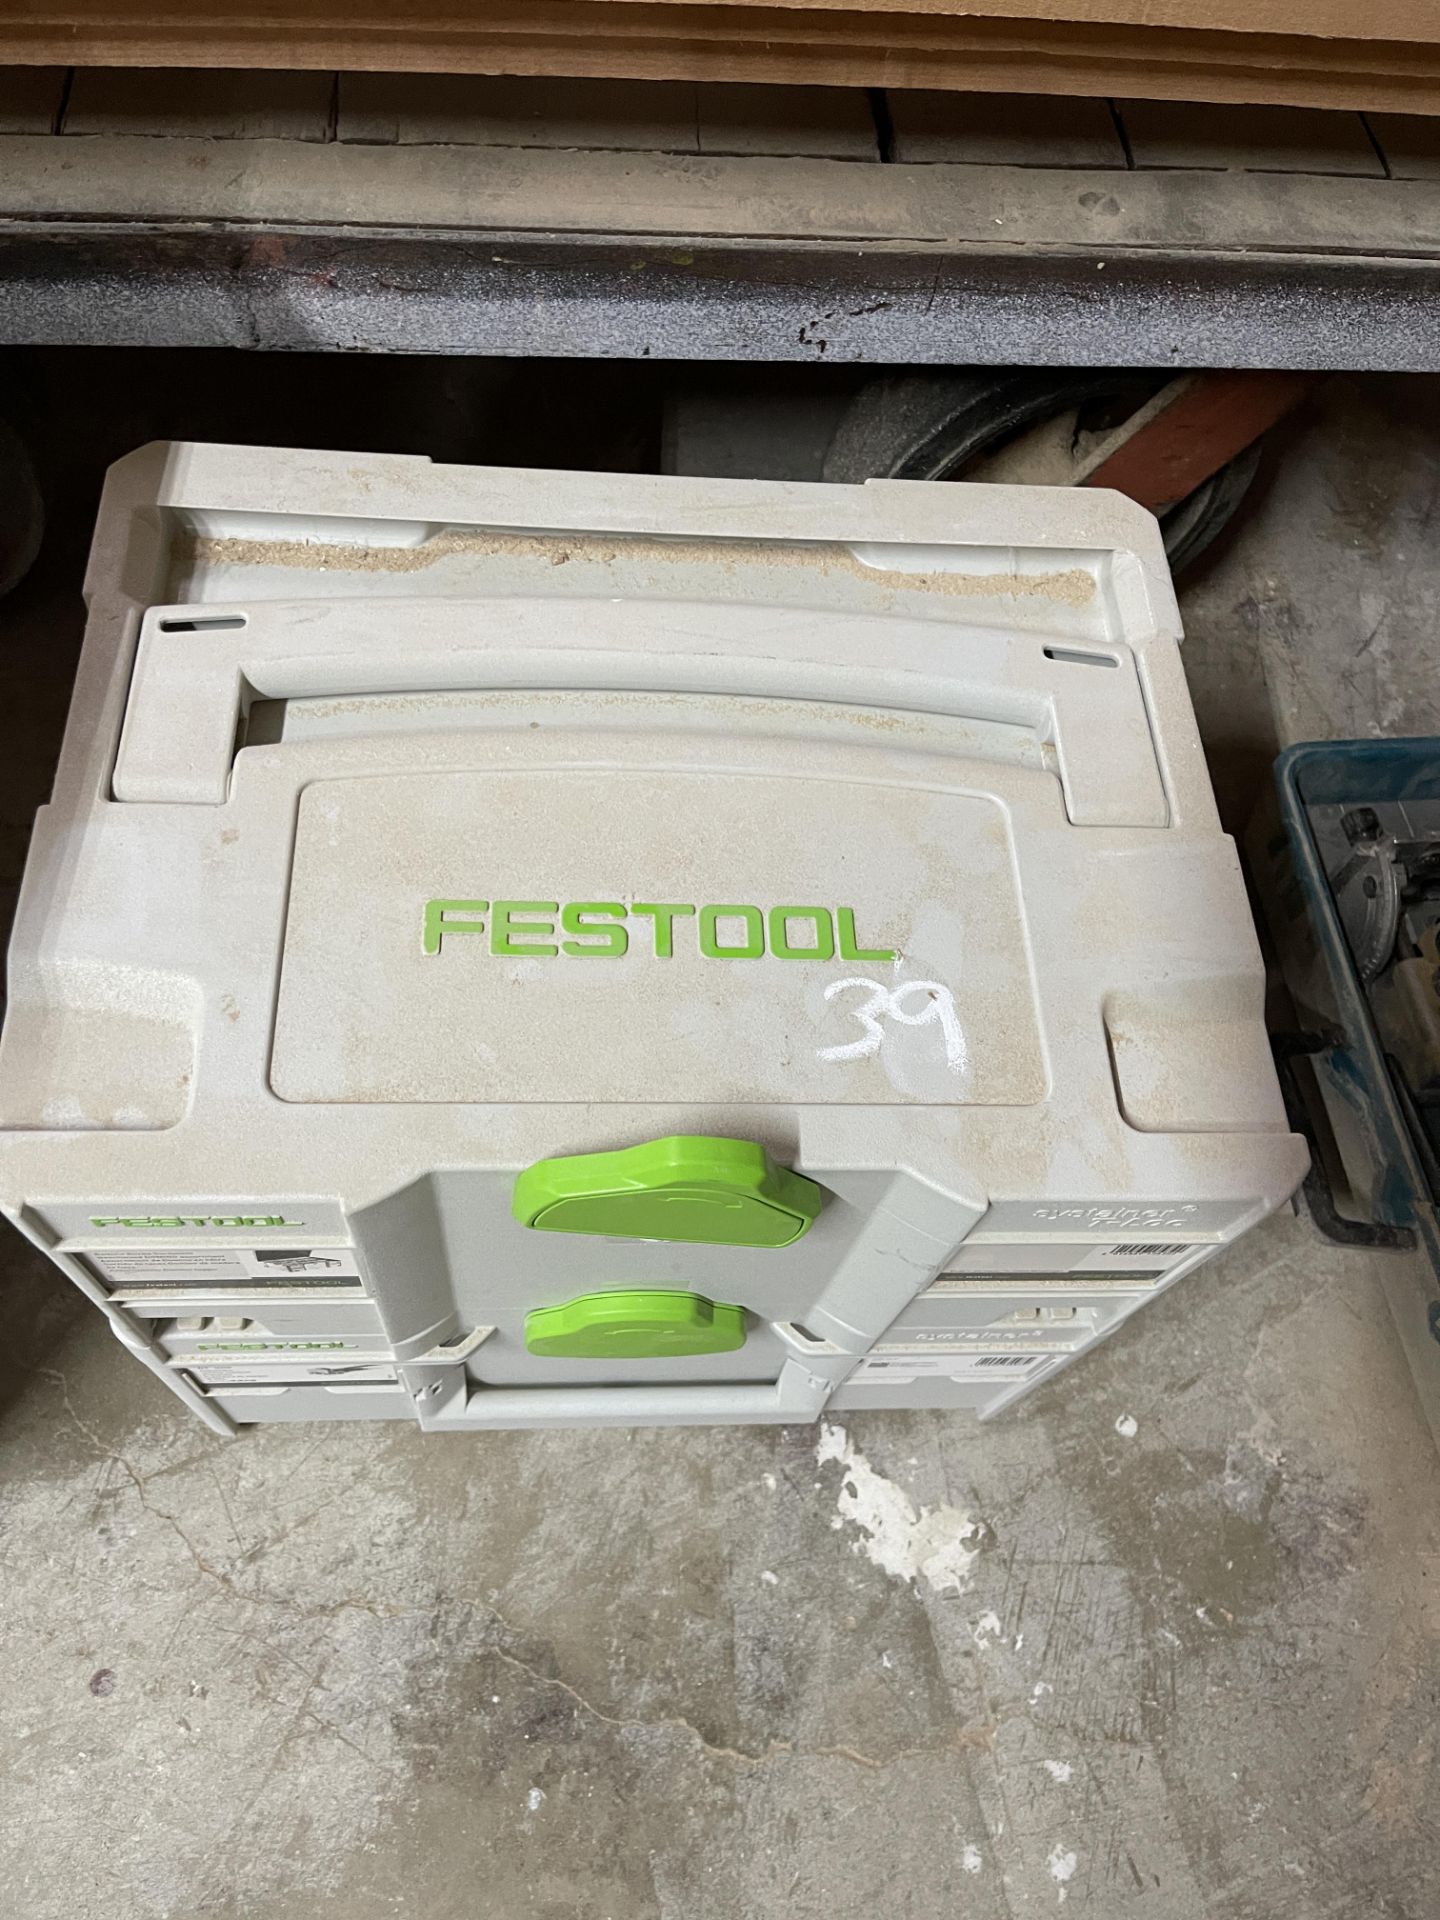 Festool Domino DF500 Tenon Jointer Made in Germany - Image 2 of 4